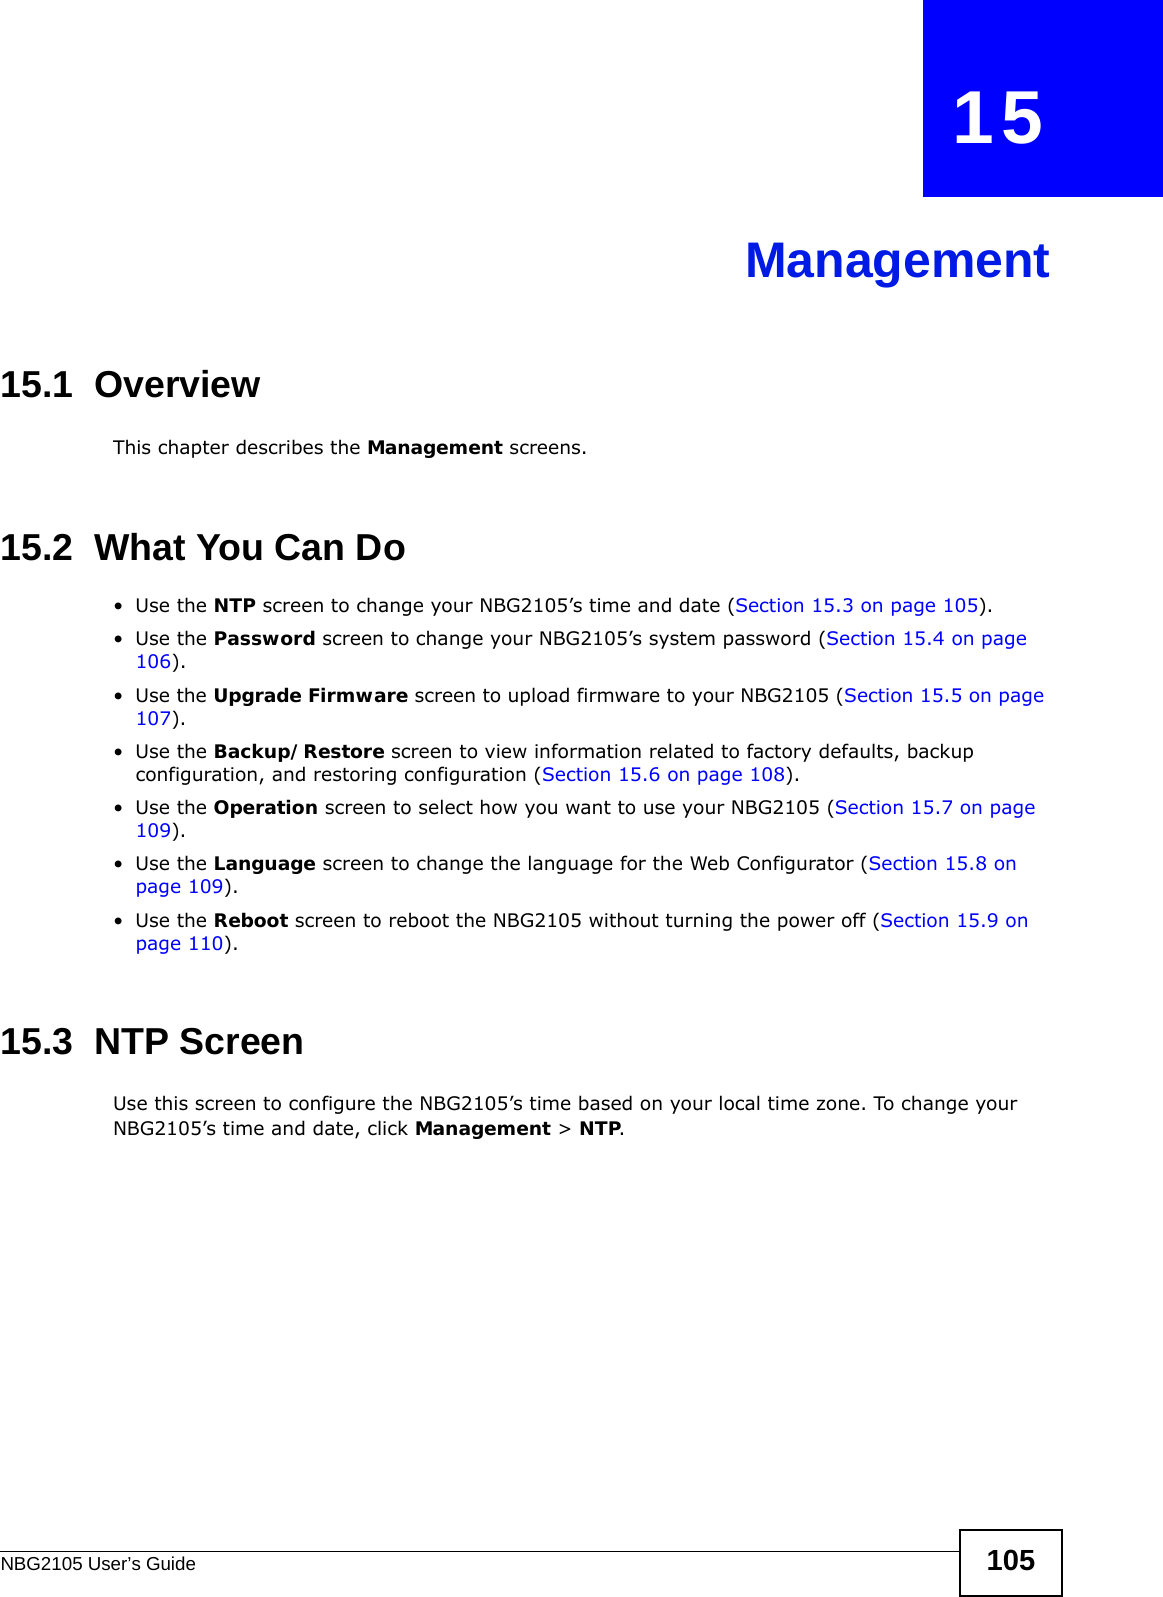 NBG2105 User’s Guide 105CHAPTER   15Management15.1  OverviewThis chapter describes the Management screens.15.2  What You Can Do•Use the NTP screen to change your NBG2105’s time and date (Section 15.3 on page 105).•Use the Password screen to change your NBG2105’s system password (Section 15.4 on page 106).•Use the Upgrade Firmware screen to upload firmware to your NBG2105 (Section 15.5 on page 107).•Use the Backup/Restore screen to view information related to factory defaults, backup configuration, and restoring configuration (Section 15.6 on page 108).•Use the Operation screen to select how you want to use your NBG2105 (Section 15.7 on page 109). •Use the Language screen to change the language for the Web Configurator (Section 15.8 on page 109).•Use the Reboot screen to reboot the NBG2105 without turning the power off (Section 15.9 on page 110).15.3  NTP ScreenUse this screen to configure the NBG2105’s time based on your local time zone. To change your NBG2105’s time and date, click Management &gt; NTP. 